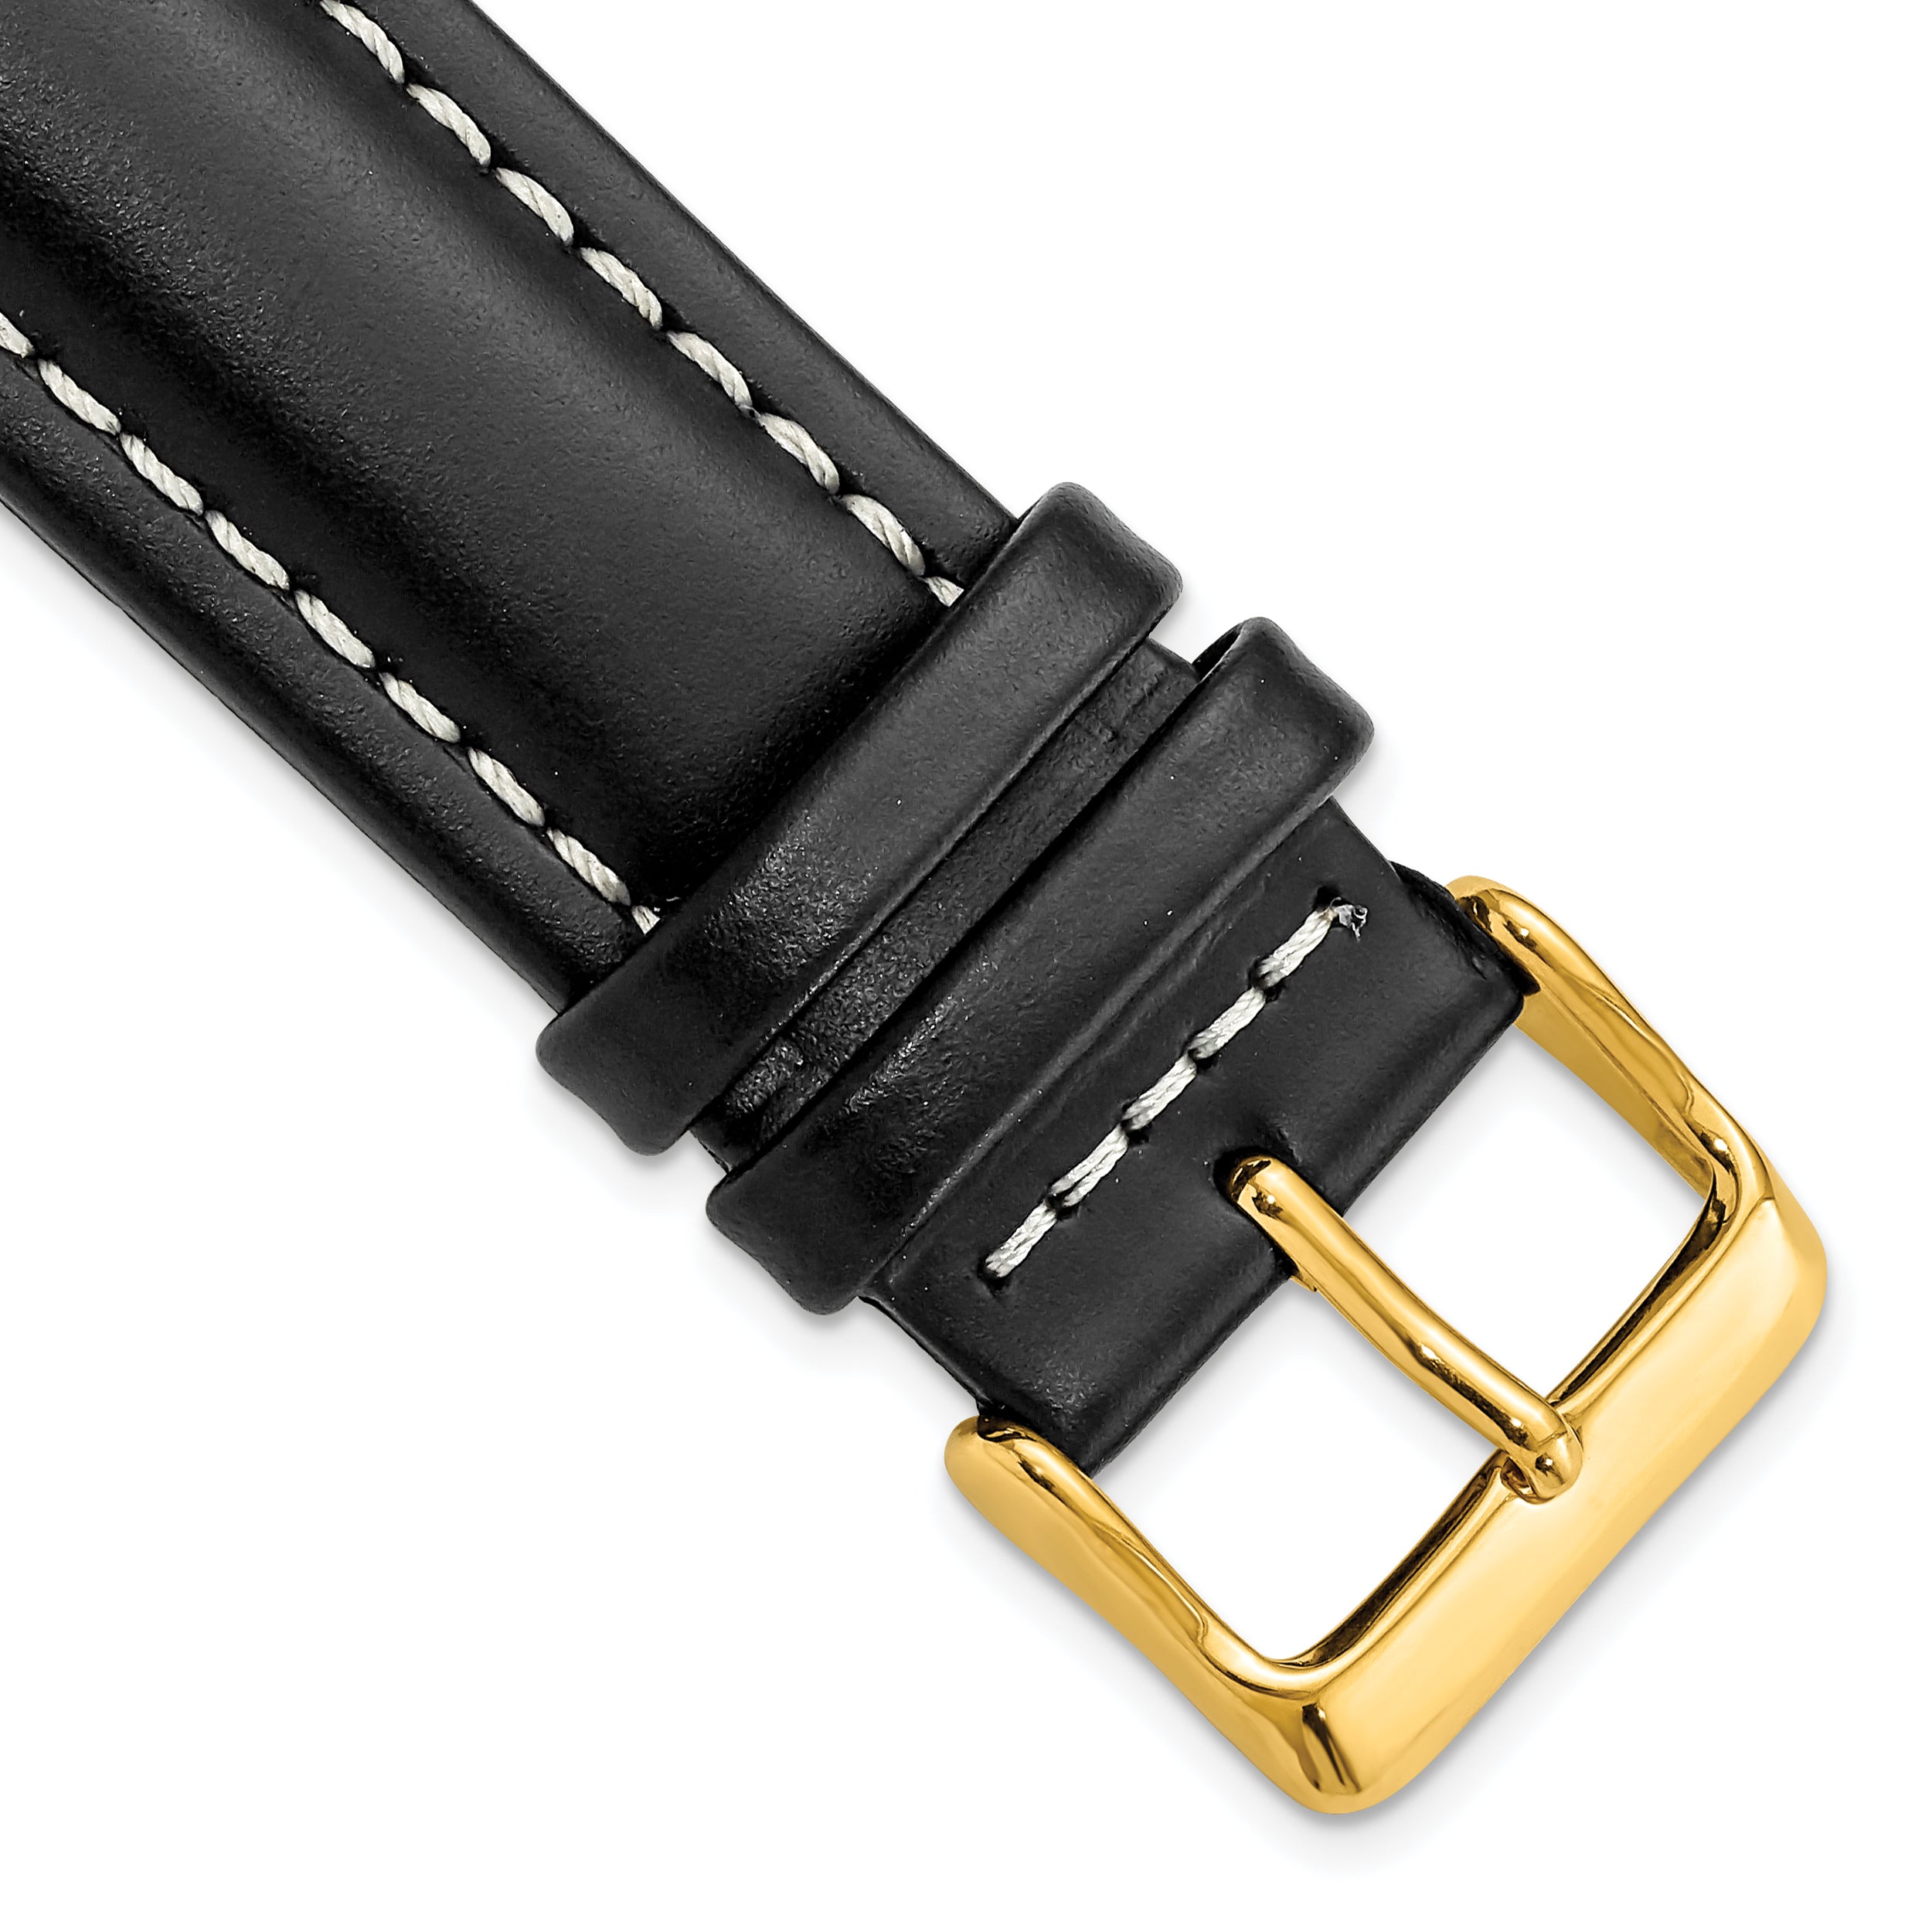 DeBeer 22mm Black Oil-tanned Leather with White Stitching and Gold-tone Buckle 7.5 inch Watch Band